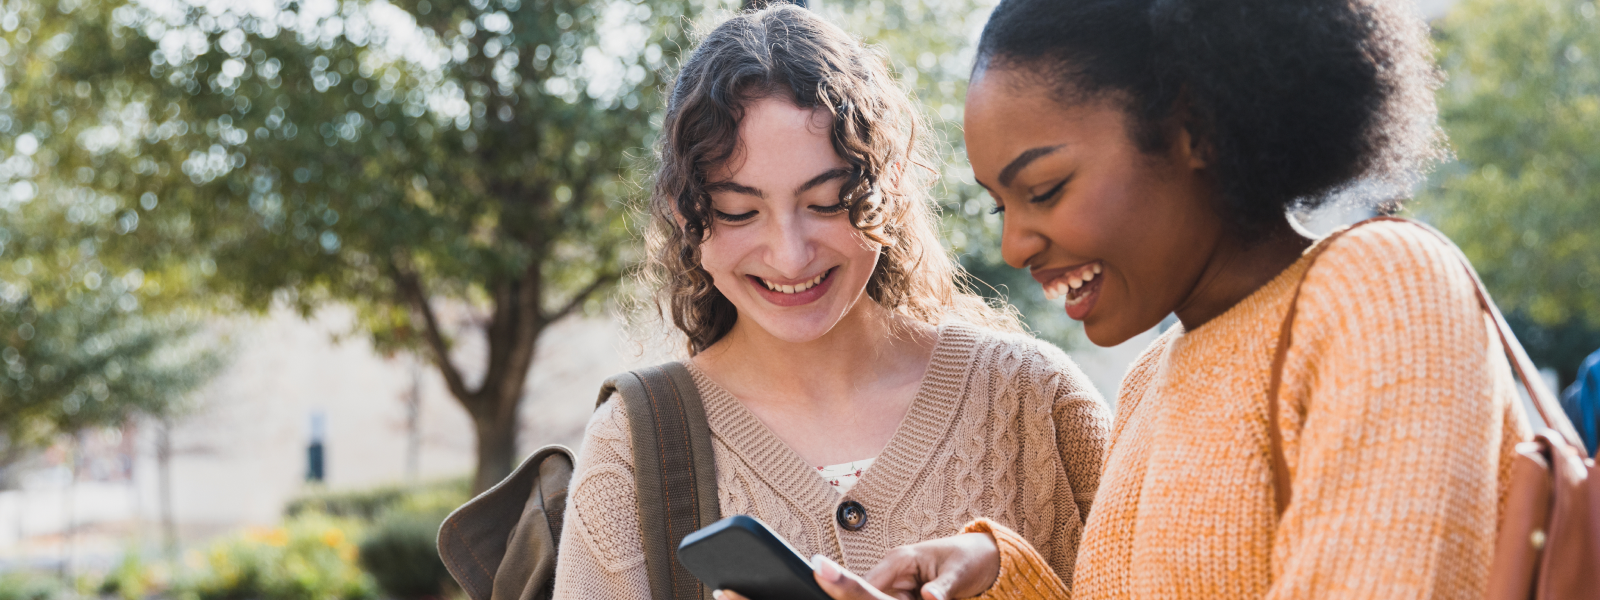 Two adolescent girls smile while gazing at a cell phone.